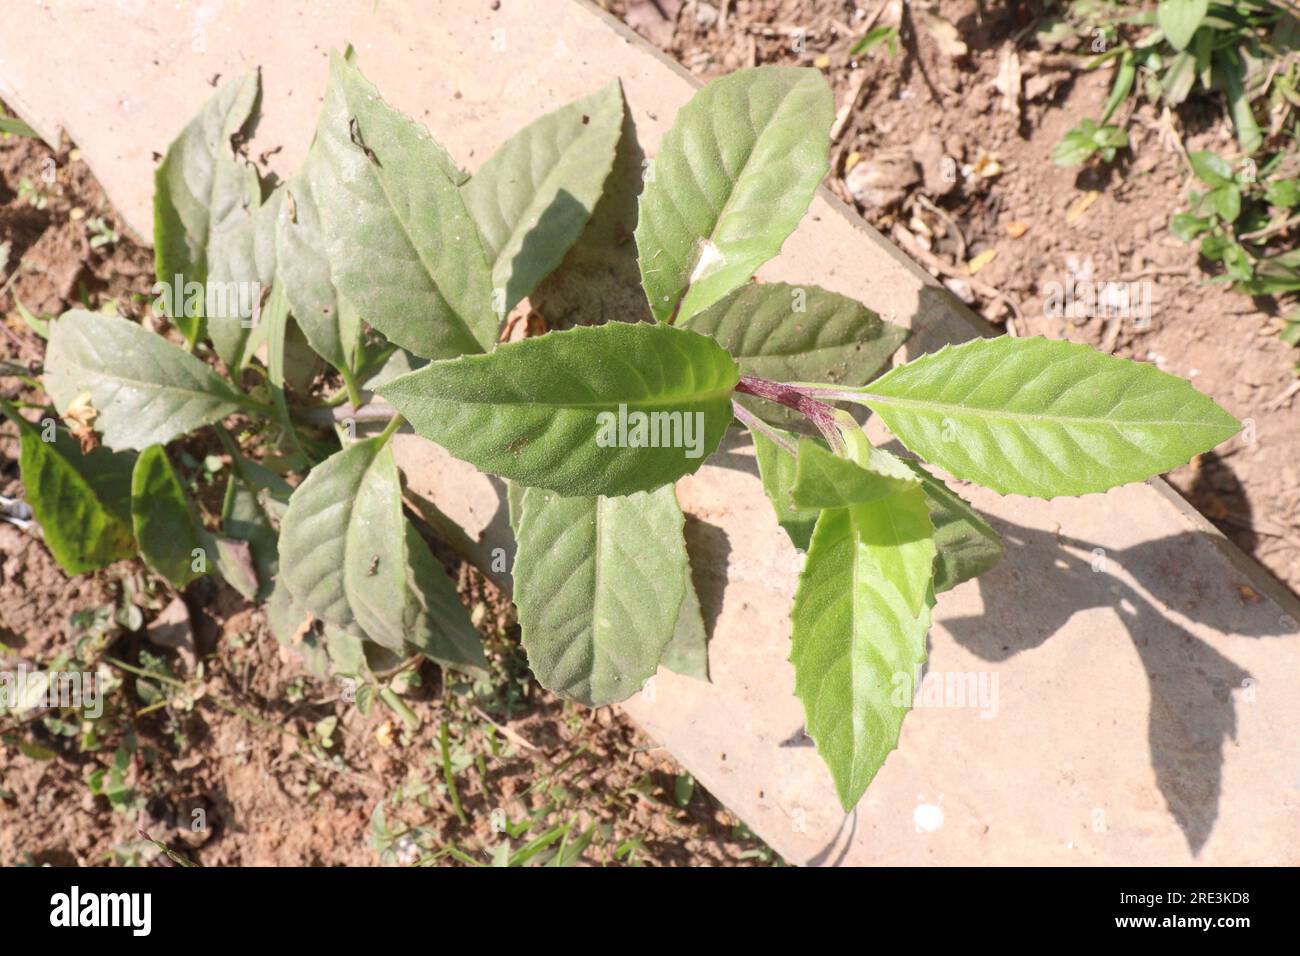 sarpagandha tree in farm for harvest and herbal use Stock Photo